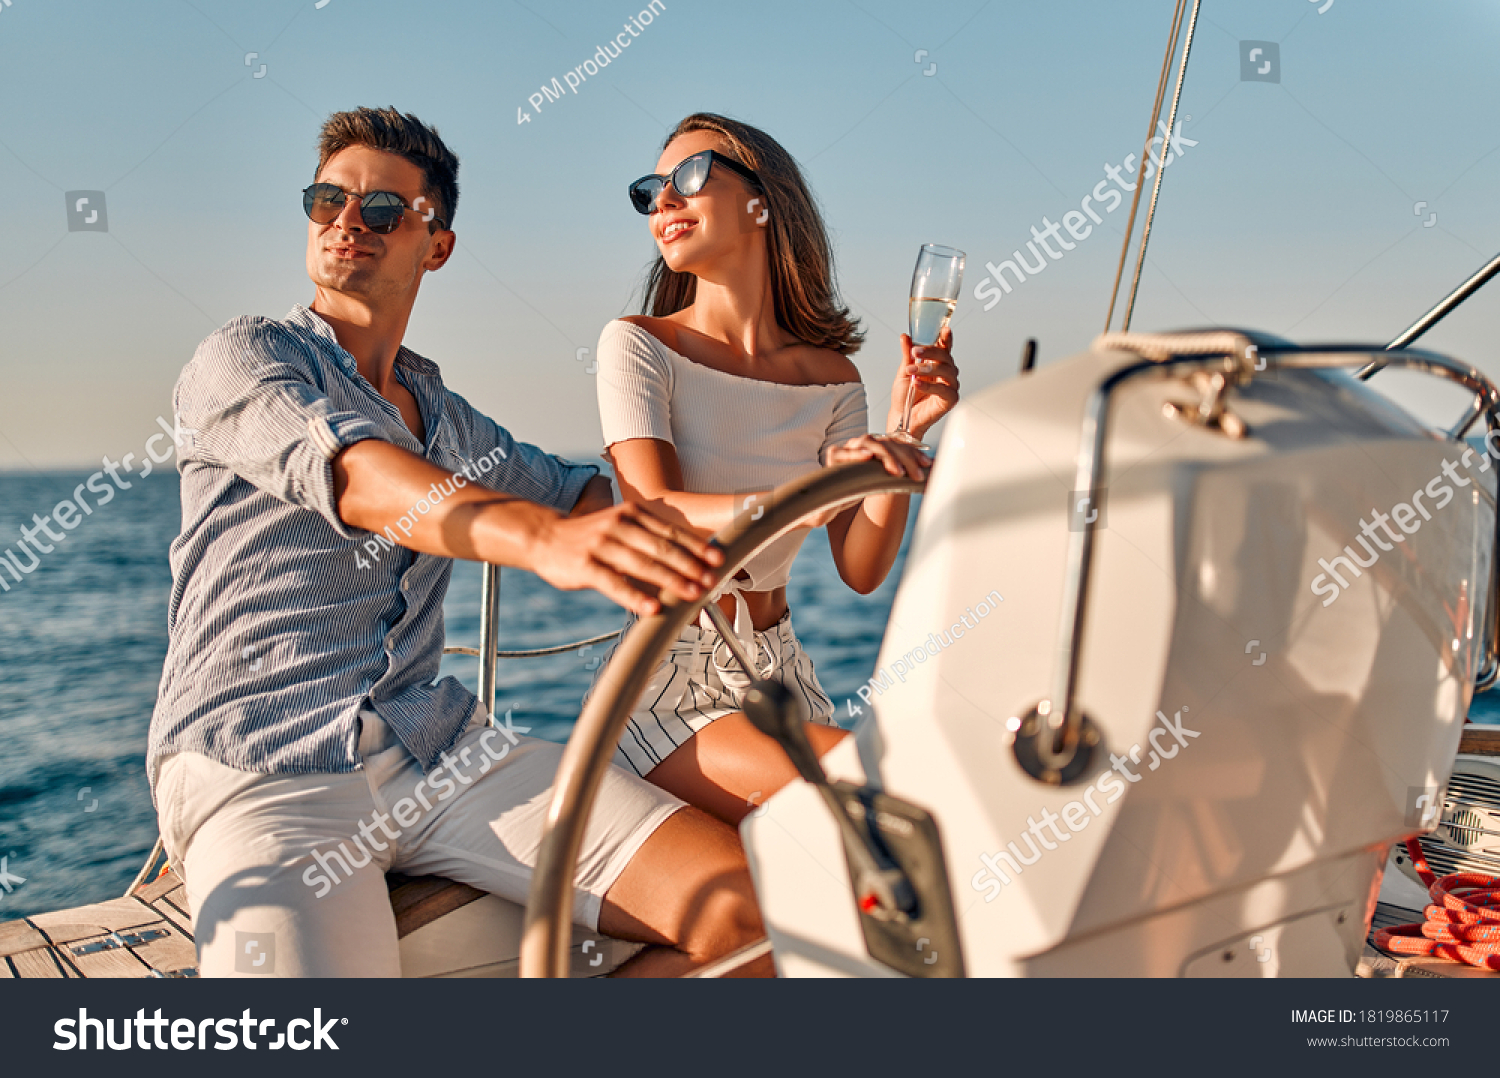 Group of friends relaxing on luxury yacht. Having fun together while sailing in the sea. Romantic couple sitting near steering wheel. Traveling and yachting concept. #1819865117